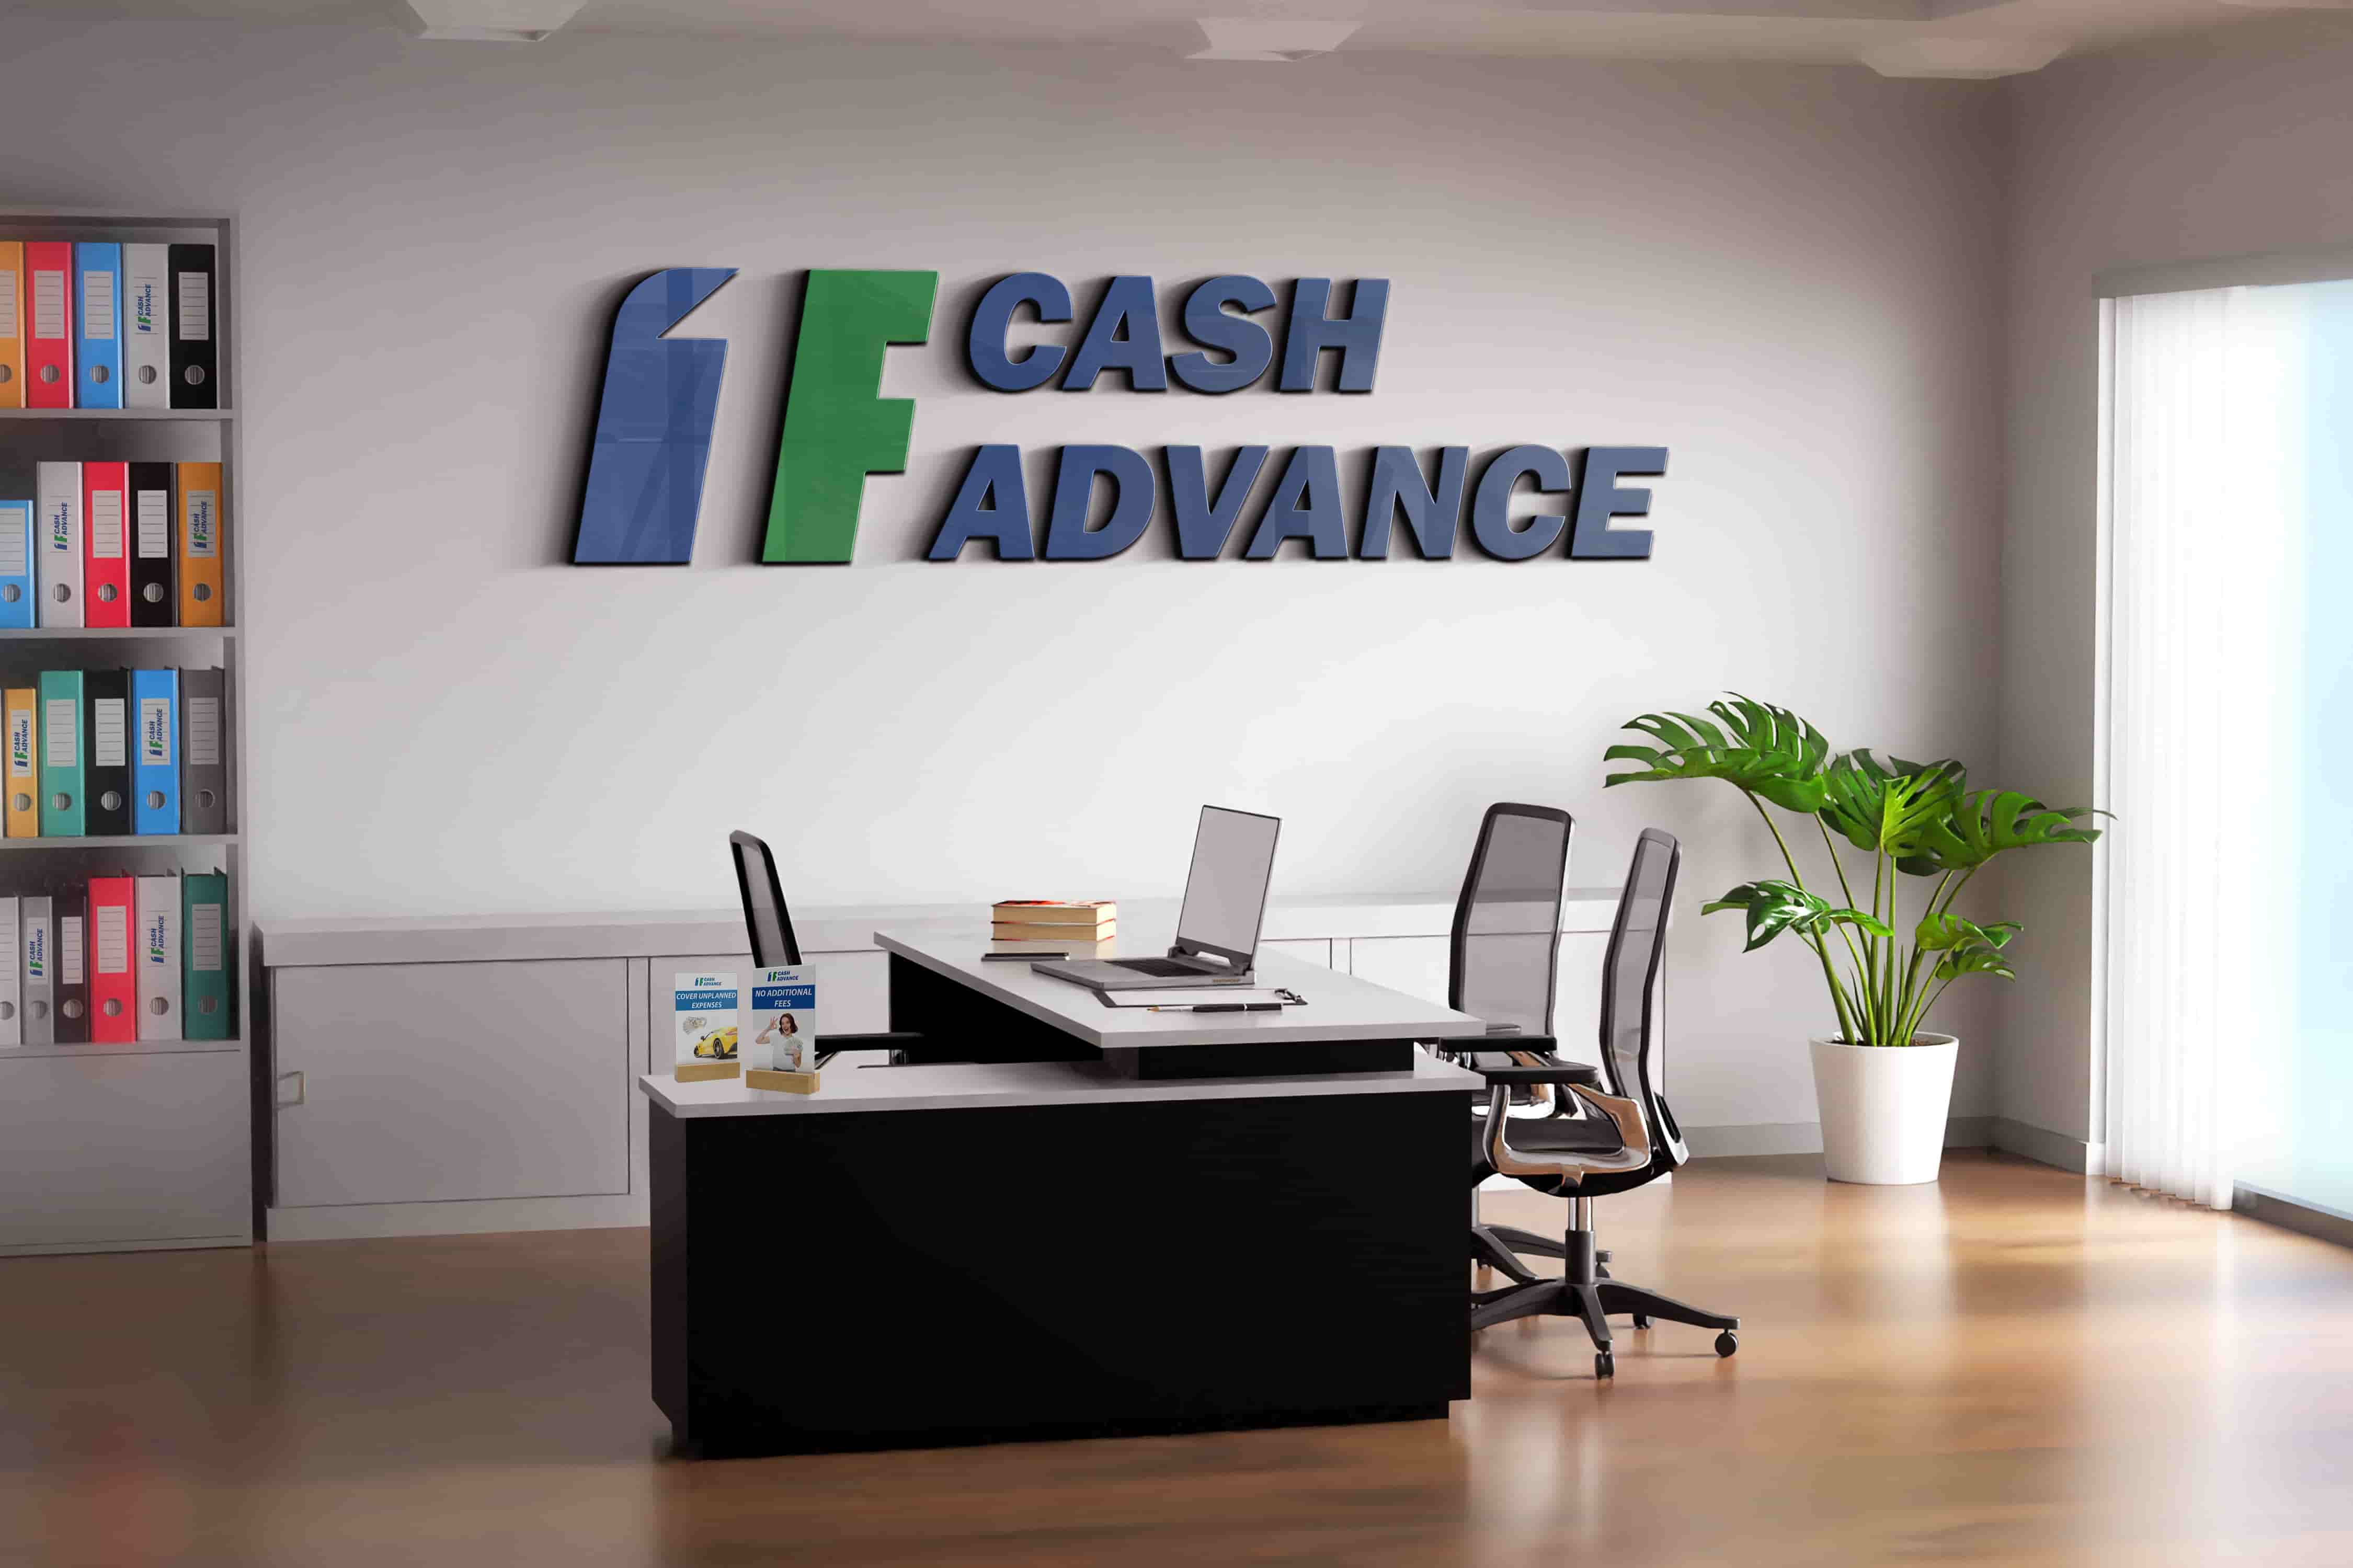 Cash advance in Bend, OR